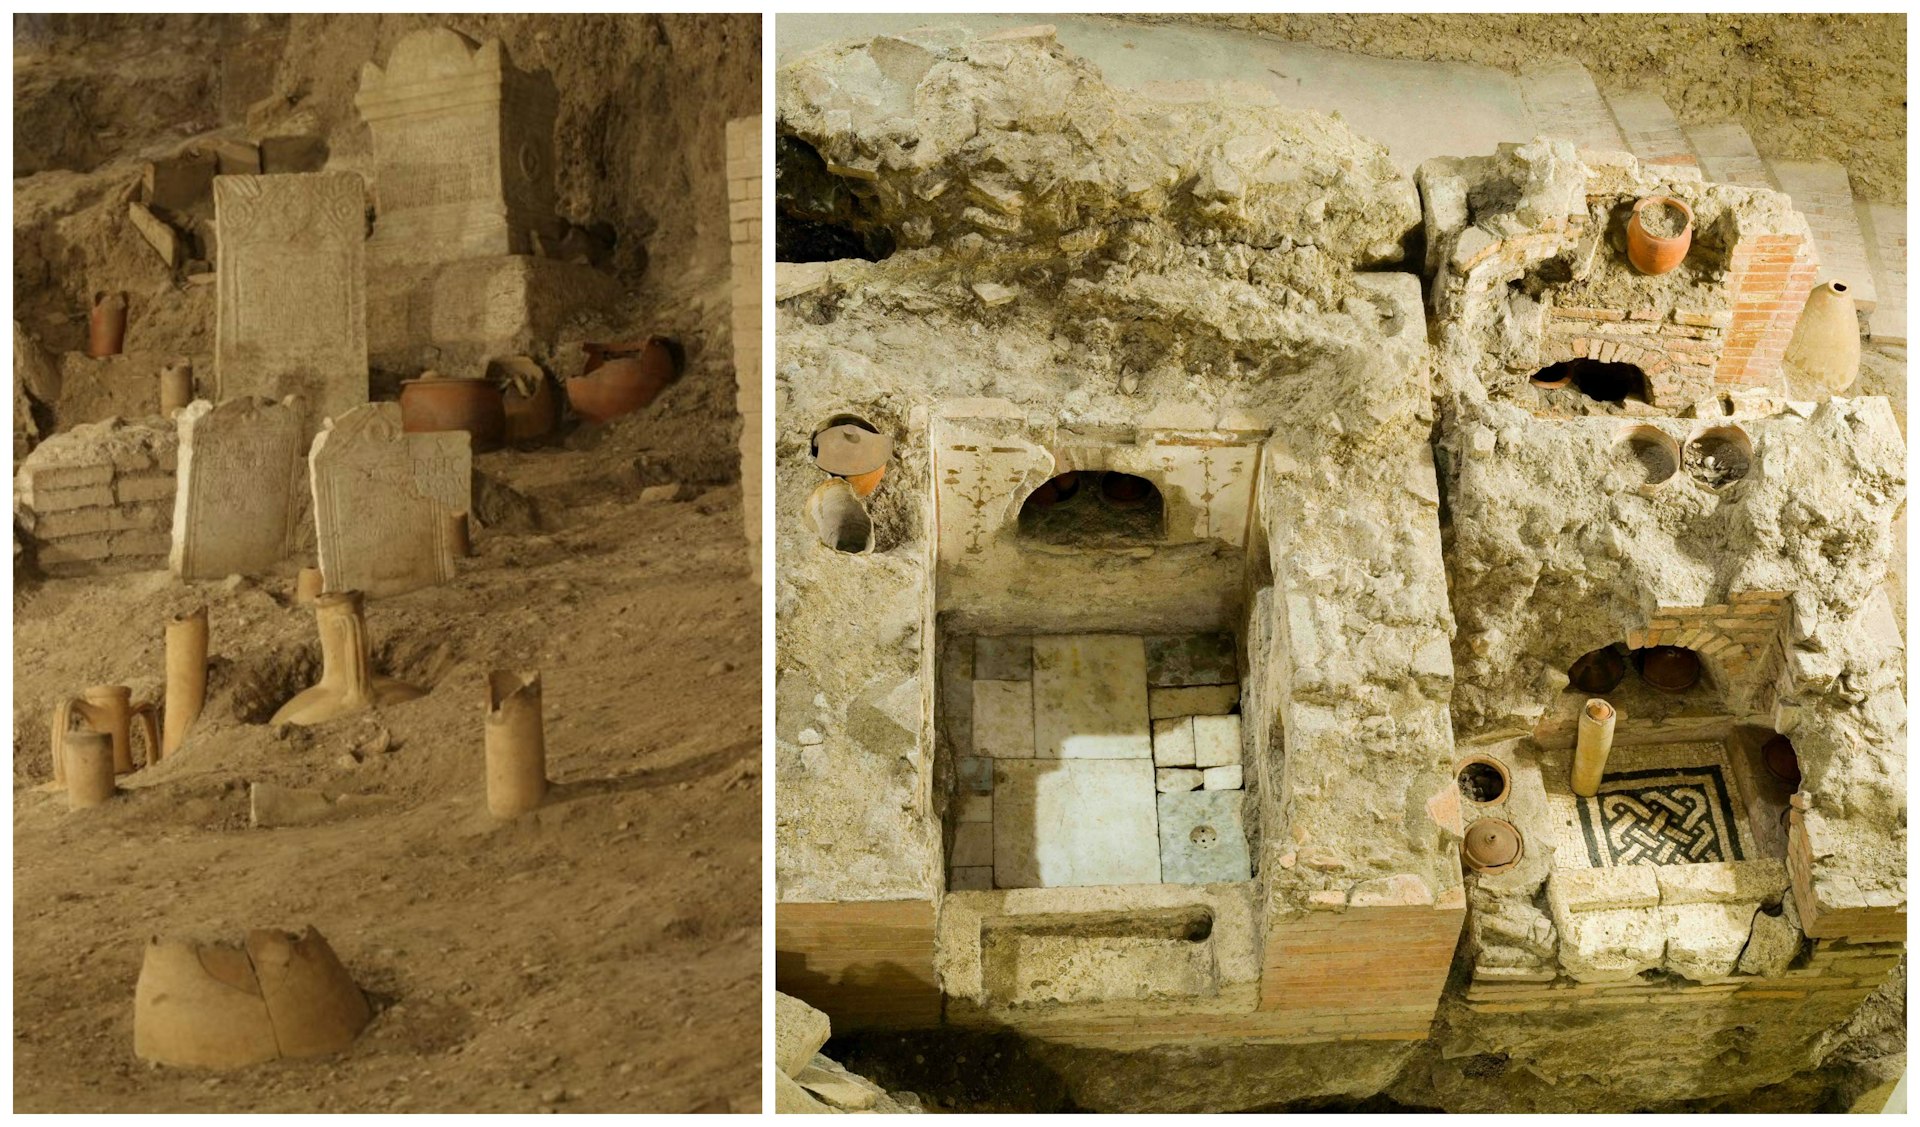 Terracotta urns and other Ancient Roman pagan burial offerings are seen in the necropolis under St Peter's Basilica